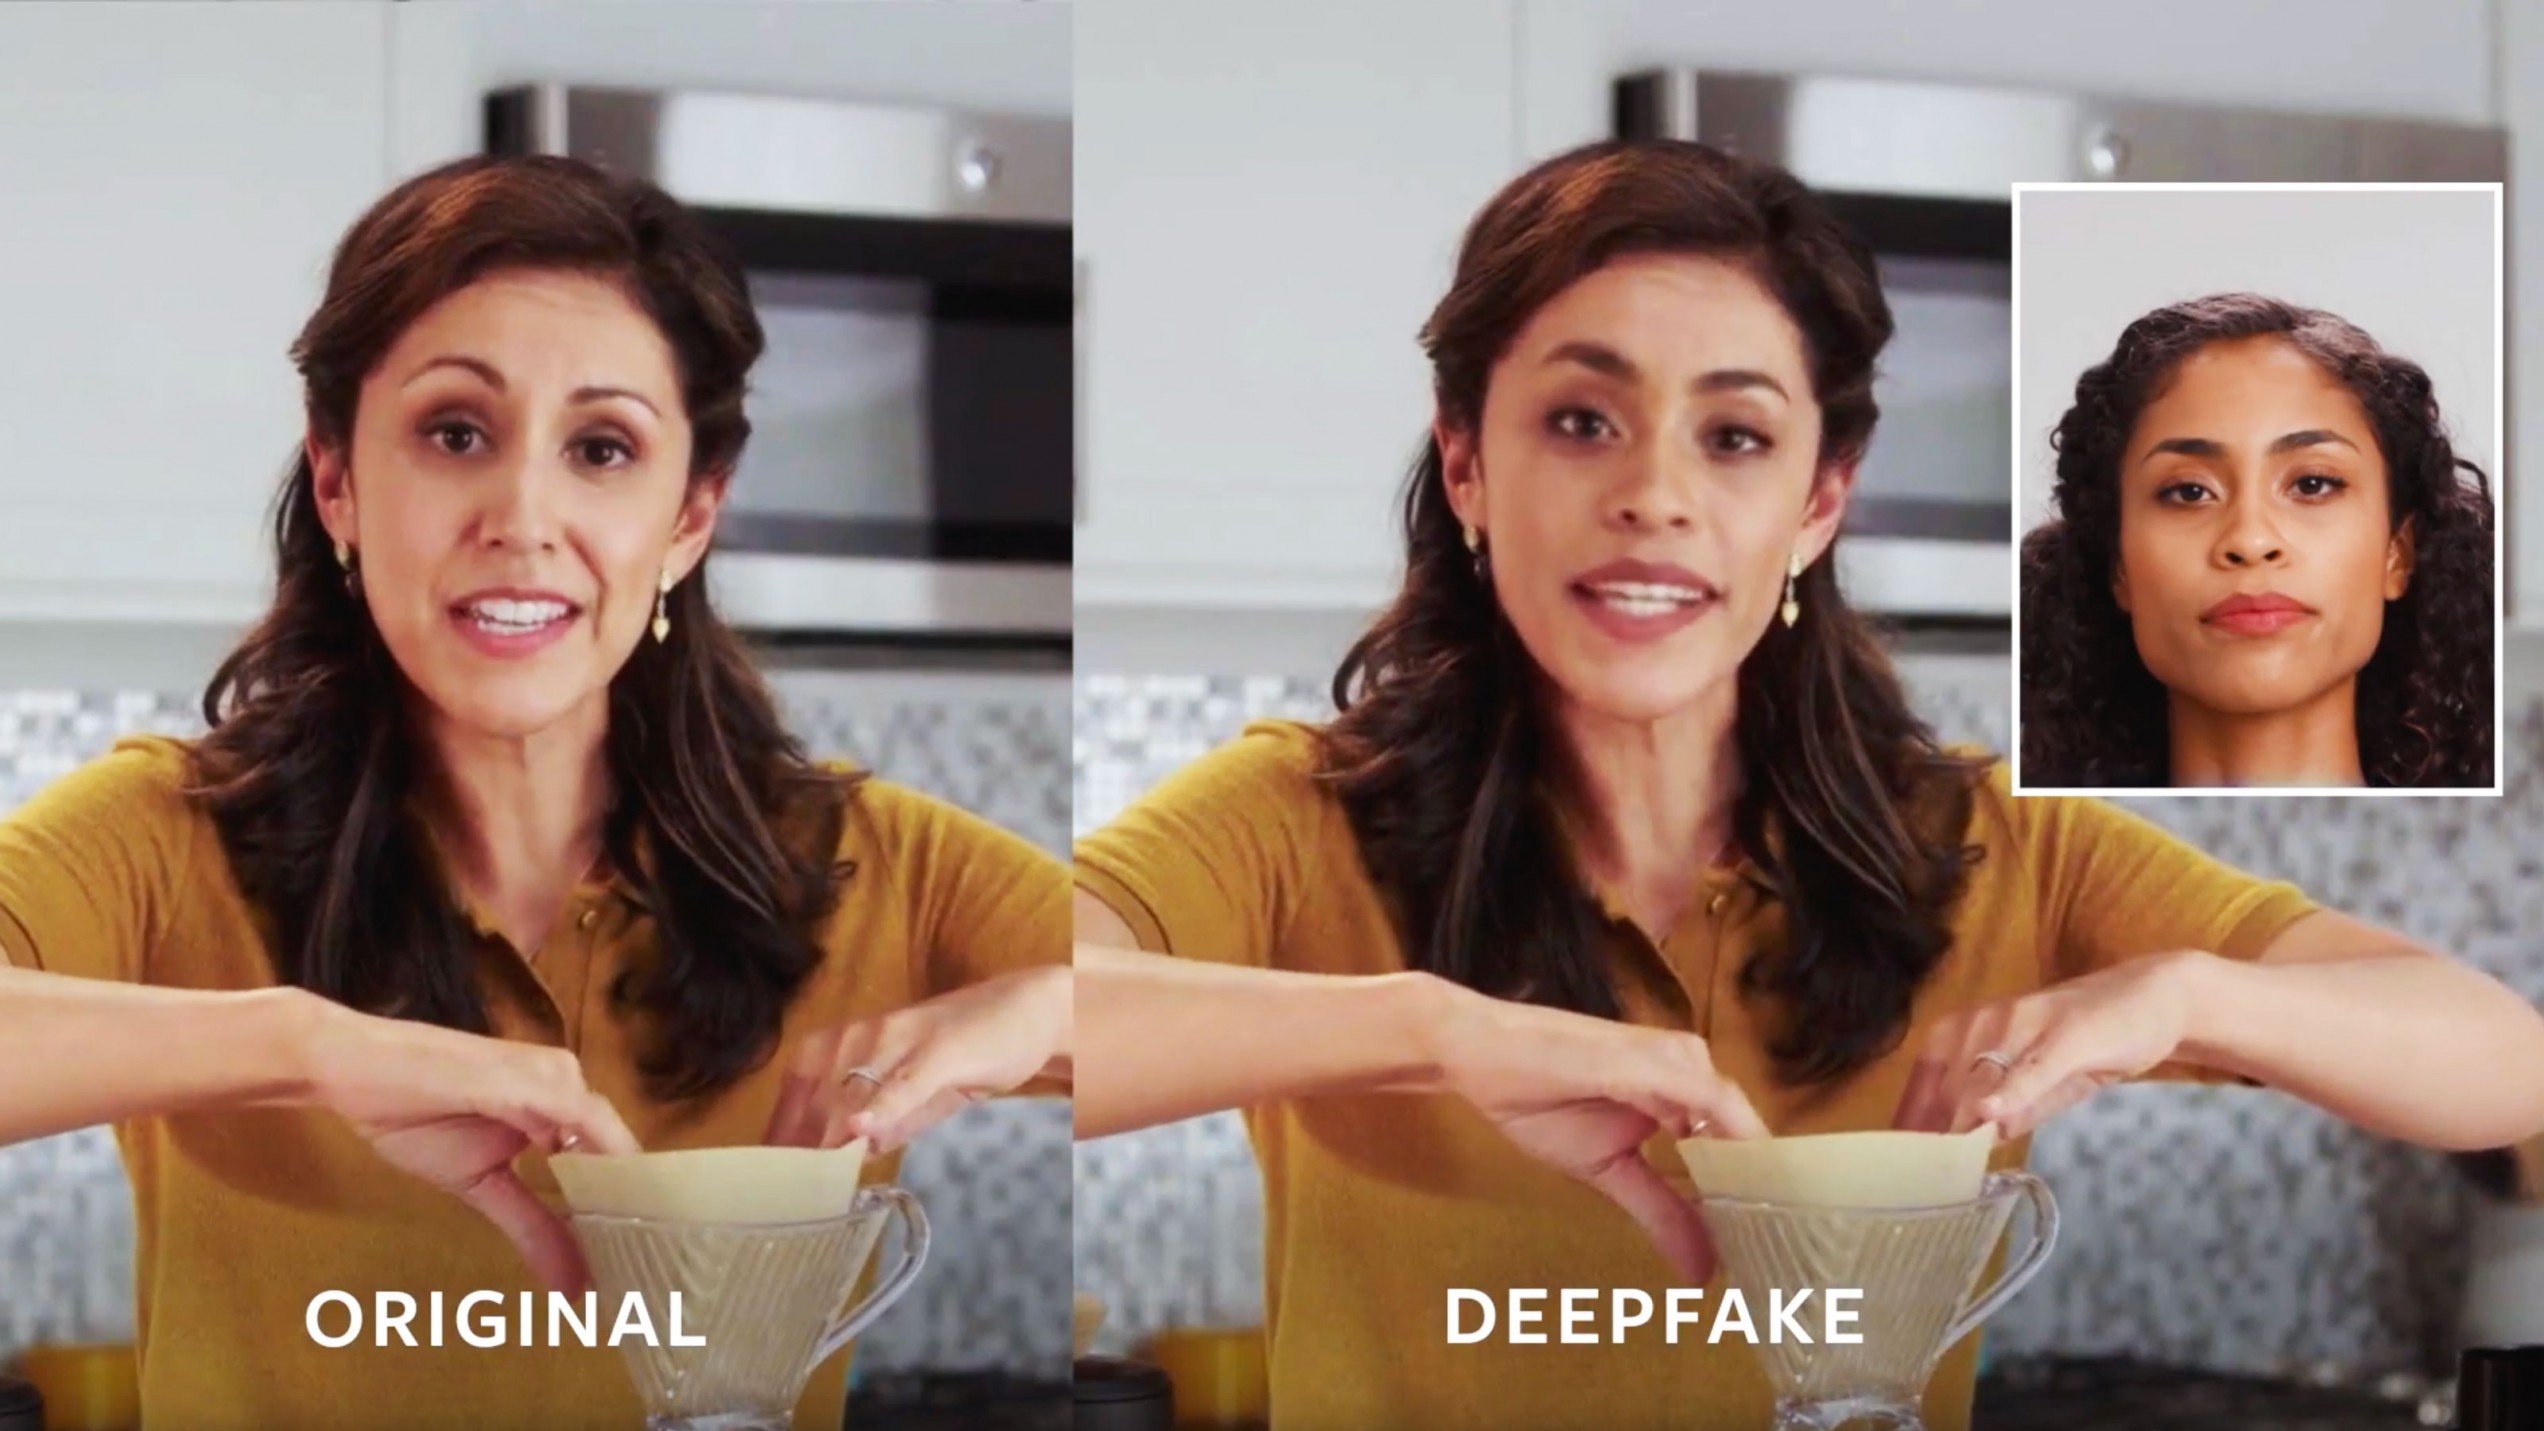 An example circulated by Facebook of two women making coffee: one is a deepfake.